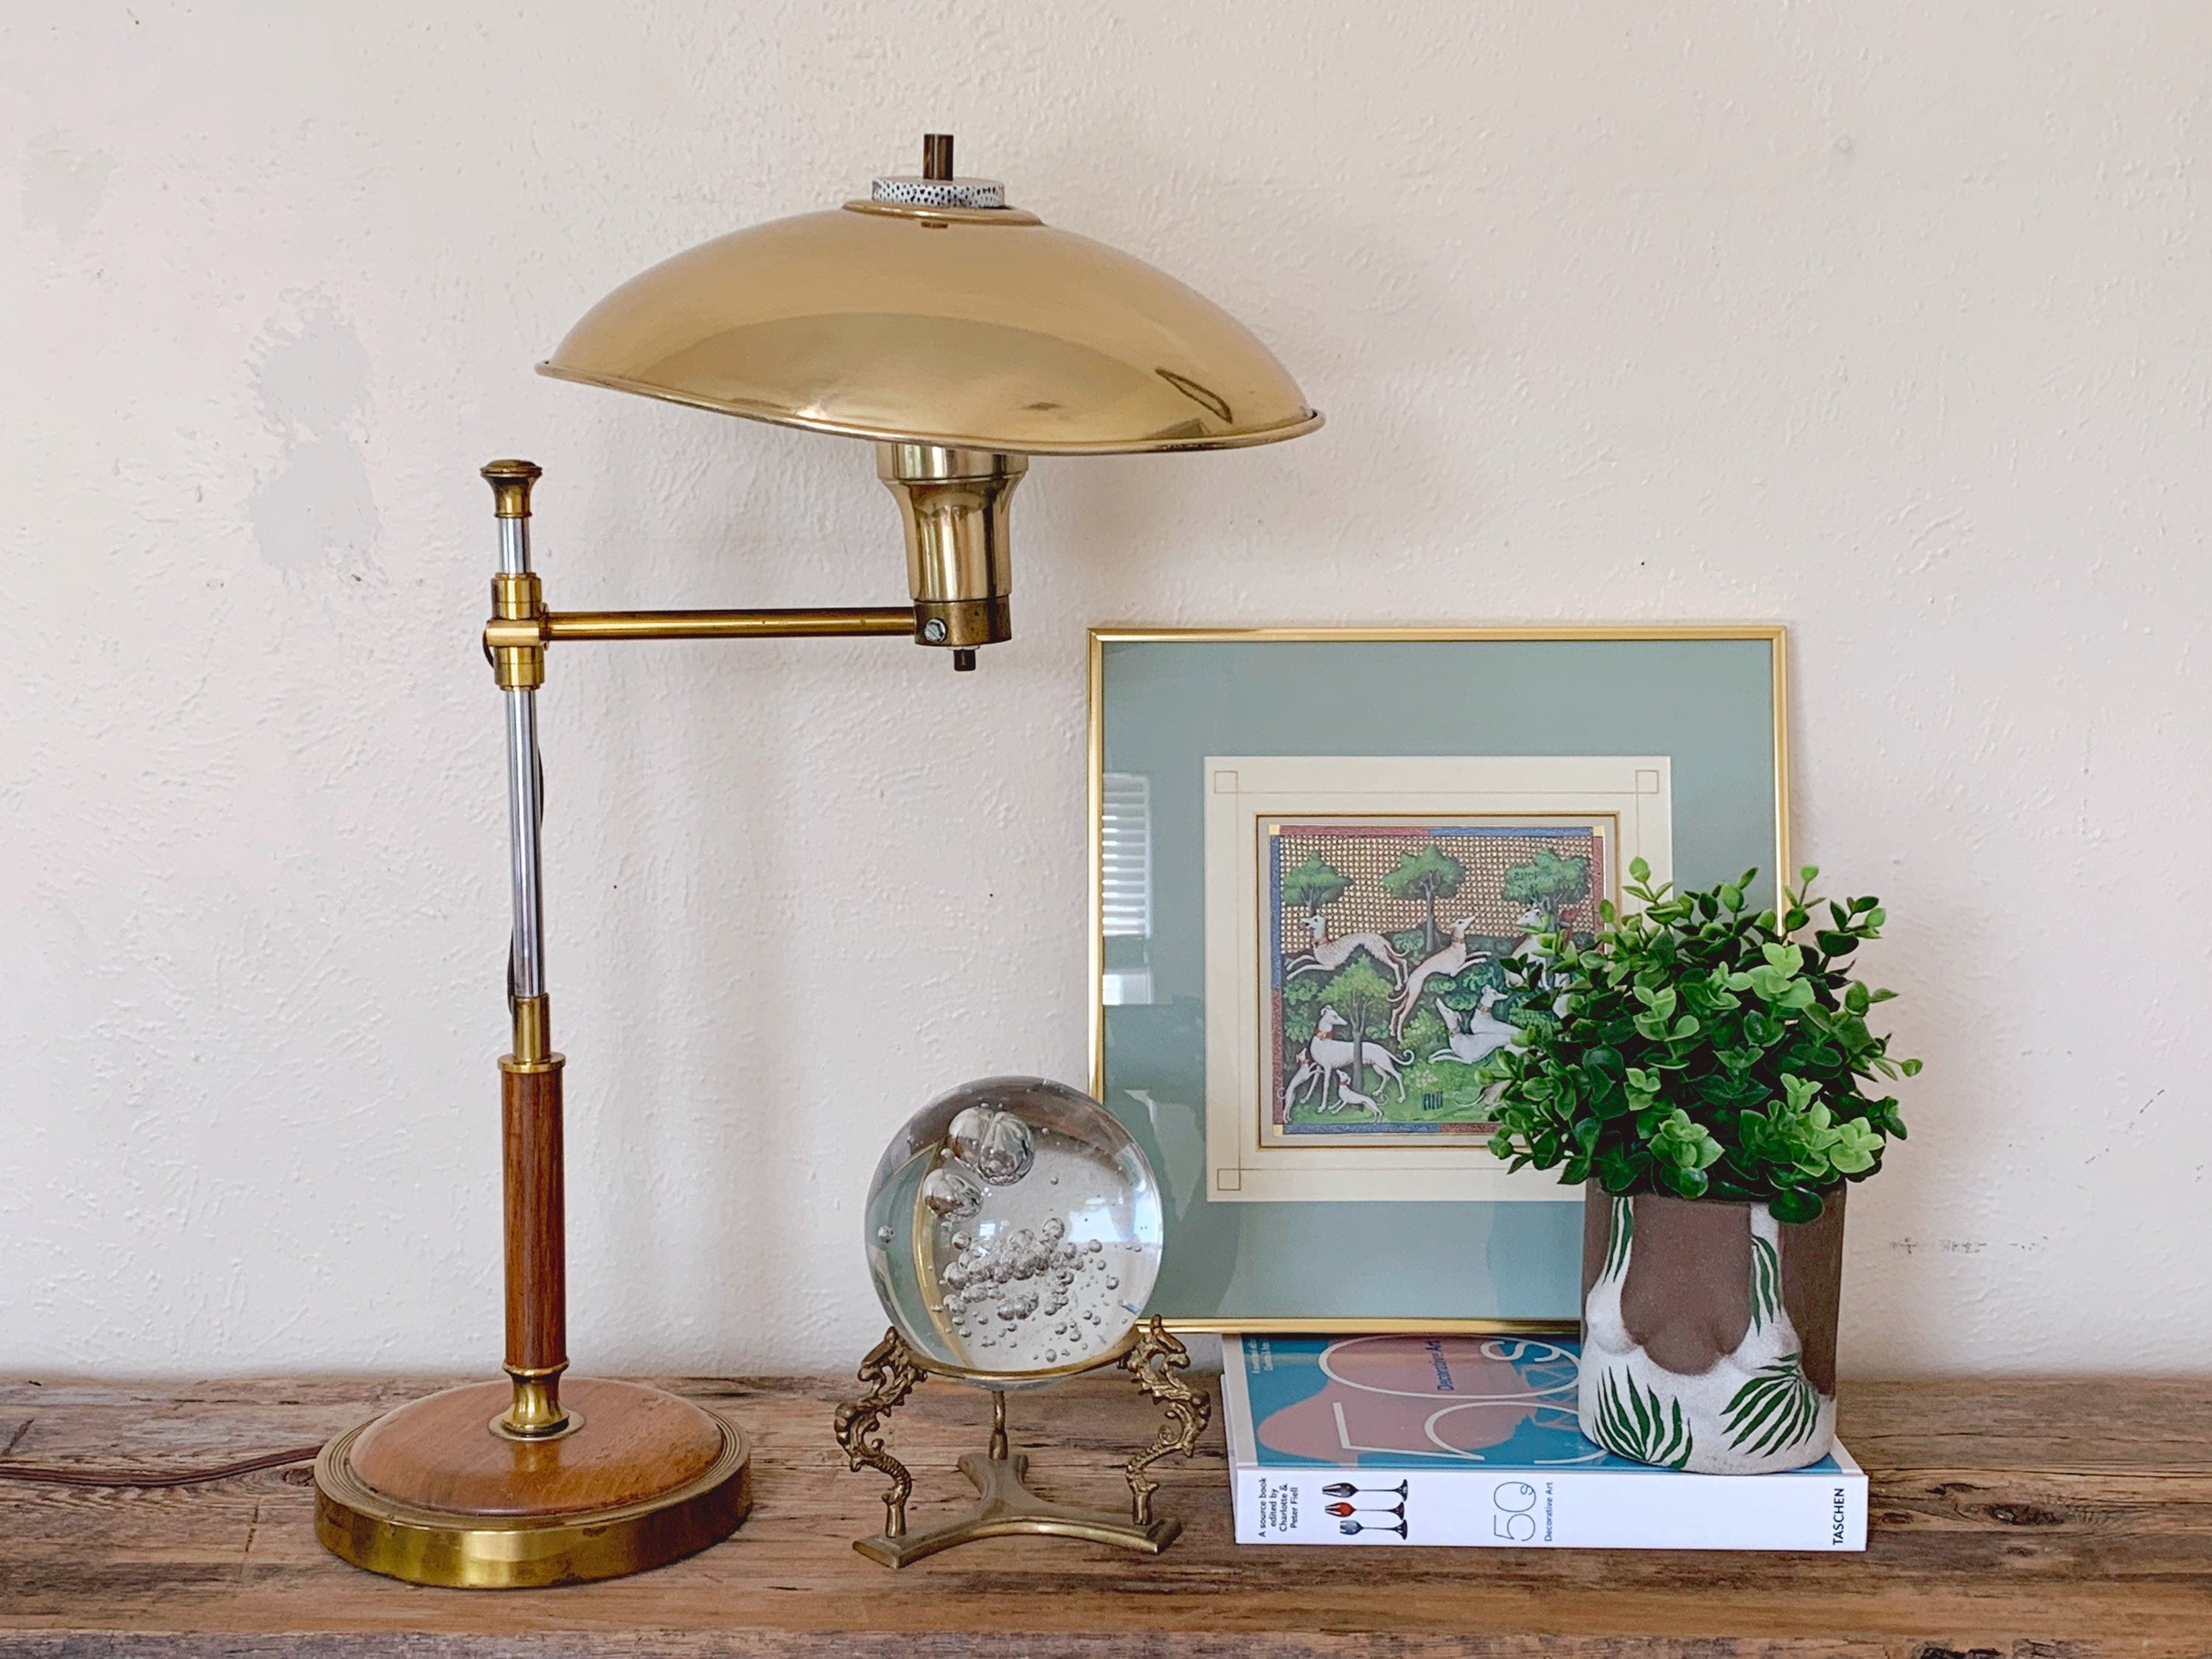 Italian Mid-Century Modern Brass Table Lamp with Swivel Arm | Vintage 1950s Adjustable Articulating Desk Lamp Office Decor with Wood Base